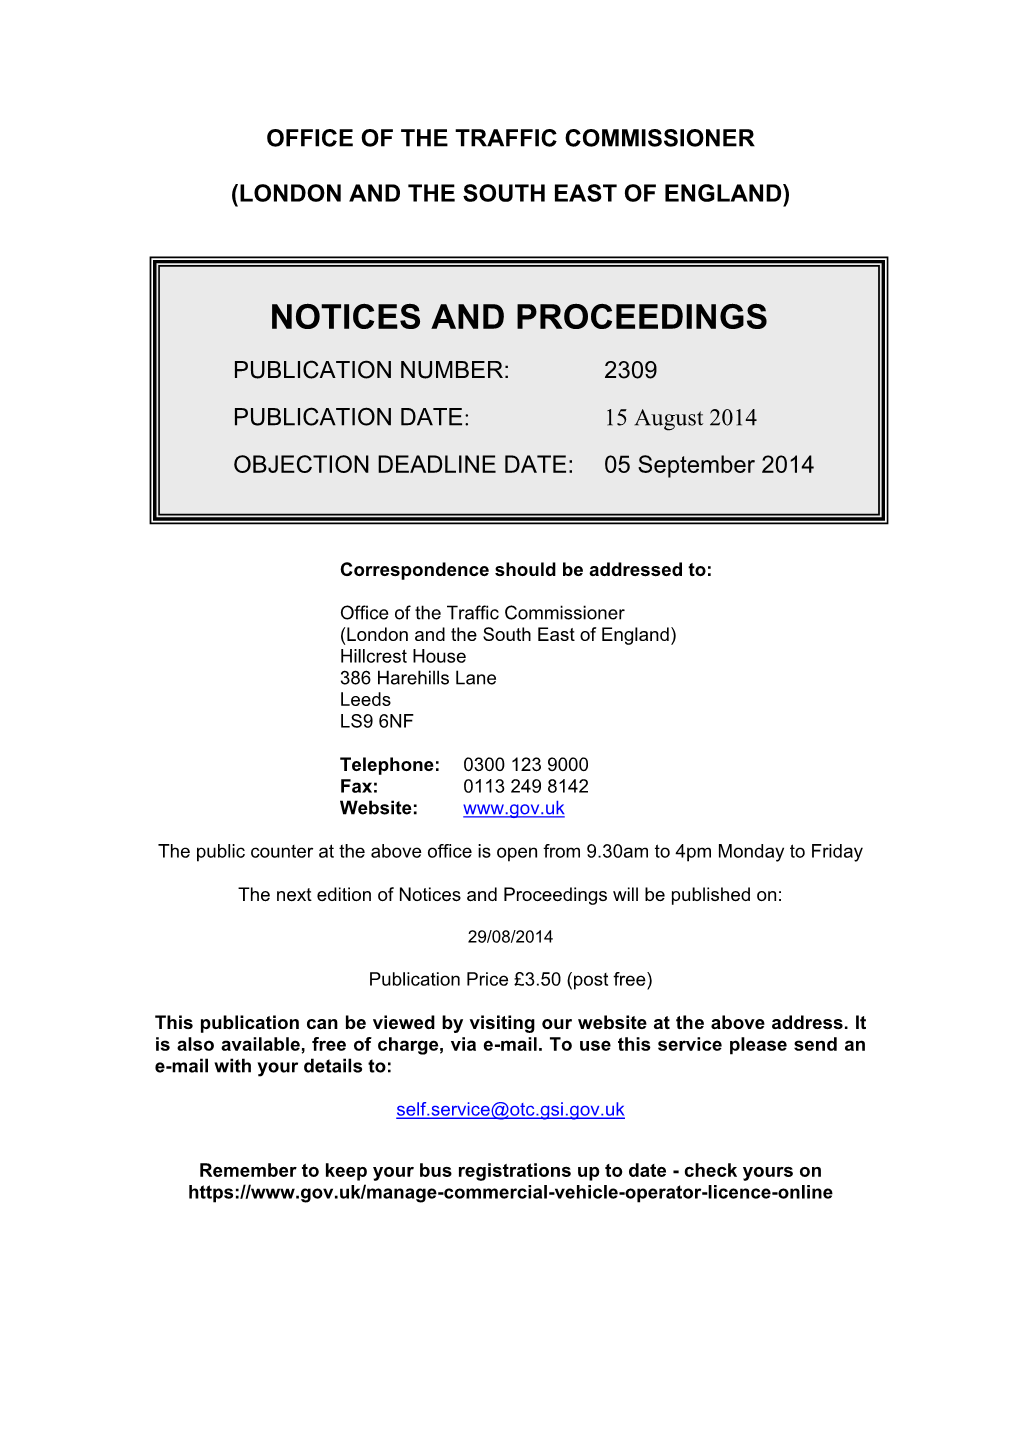 Notices and Proceedings 5 August 2014